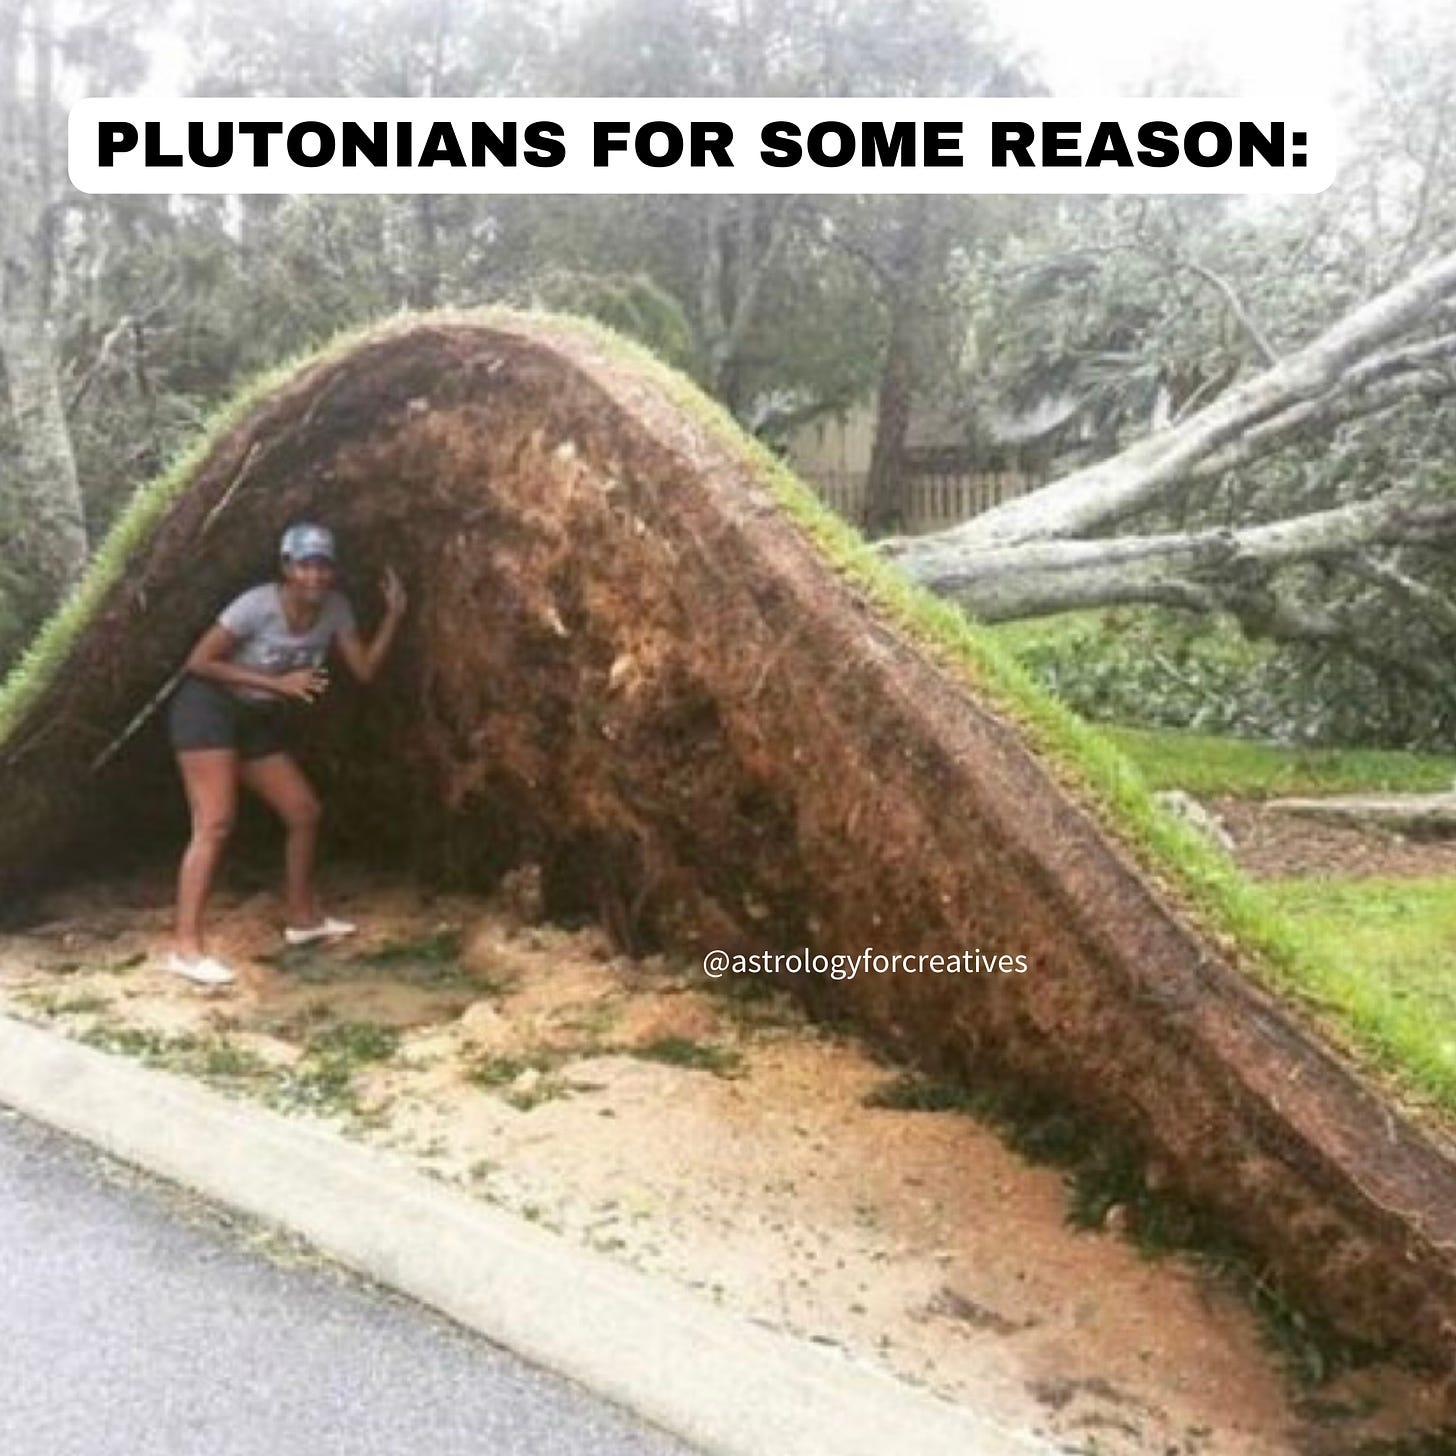 meme of someone under the ground that has lifted up that says plutonians for some reason